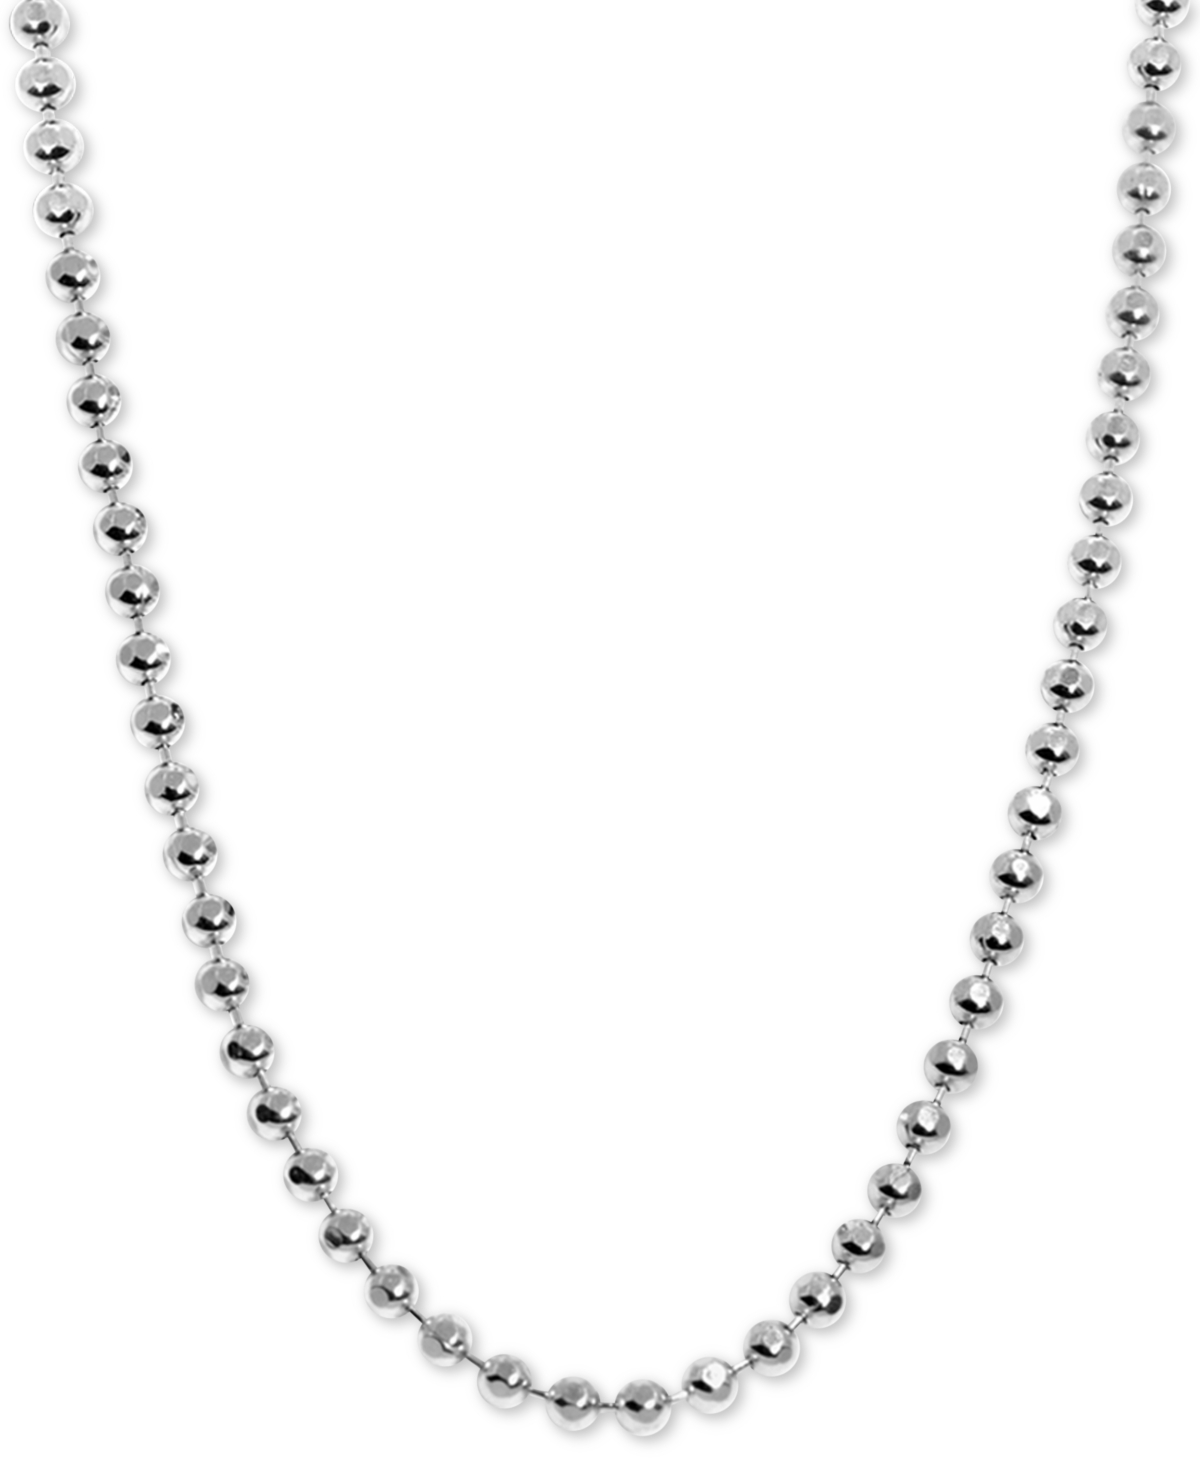 Beaded 20" Chain Necklace in Sterling Silver - Sterling Silver